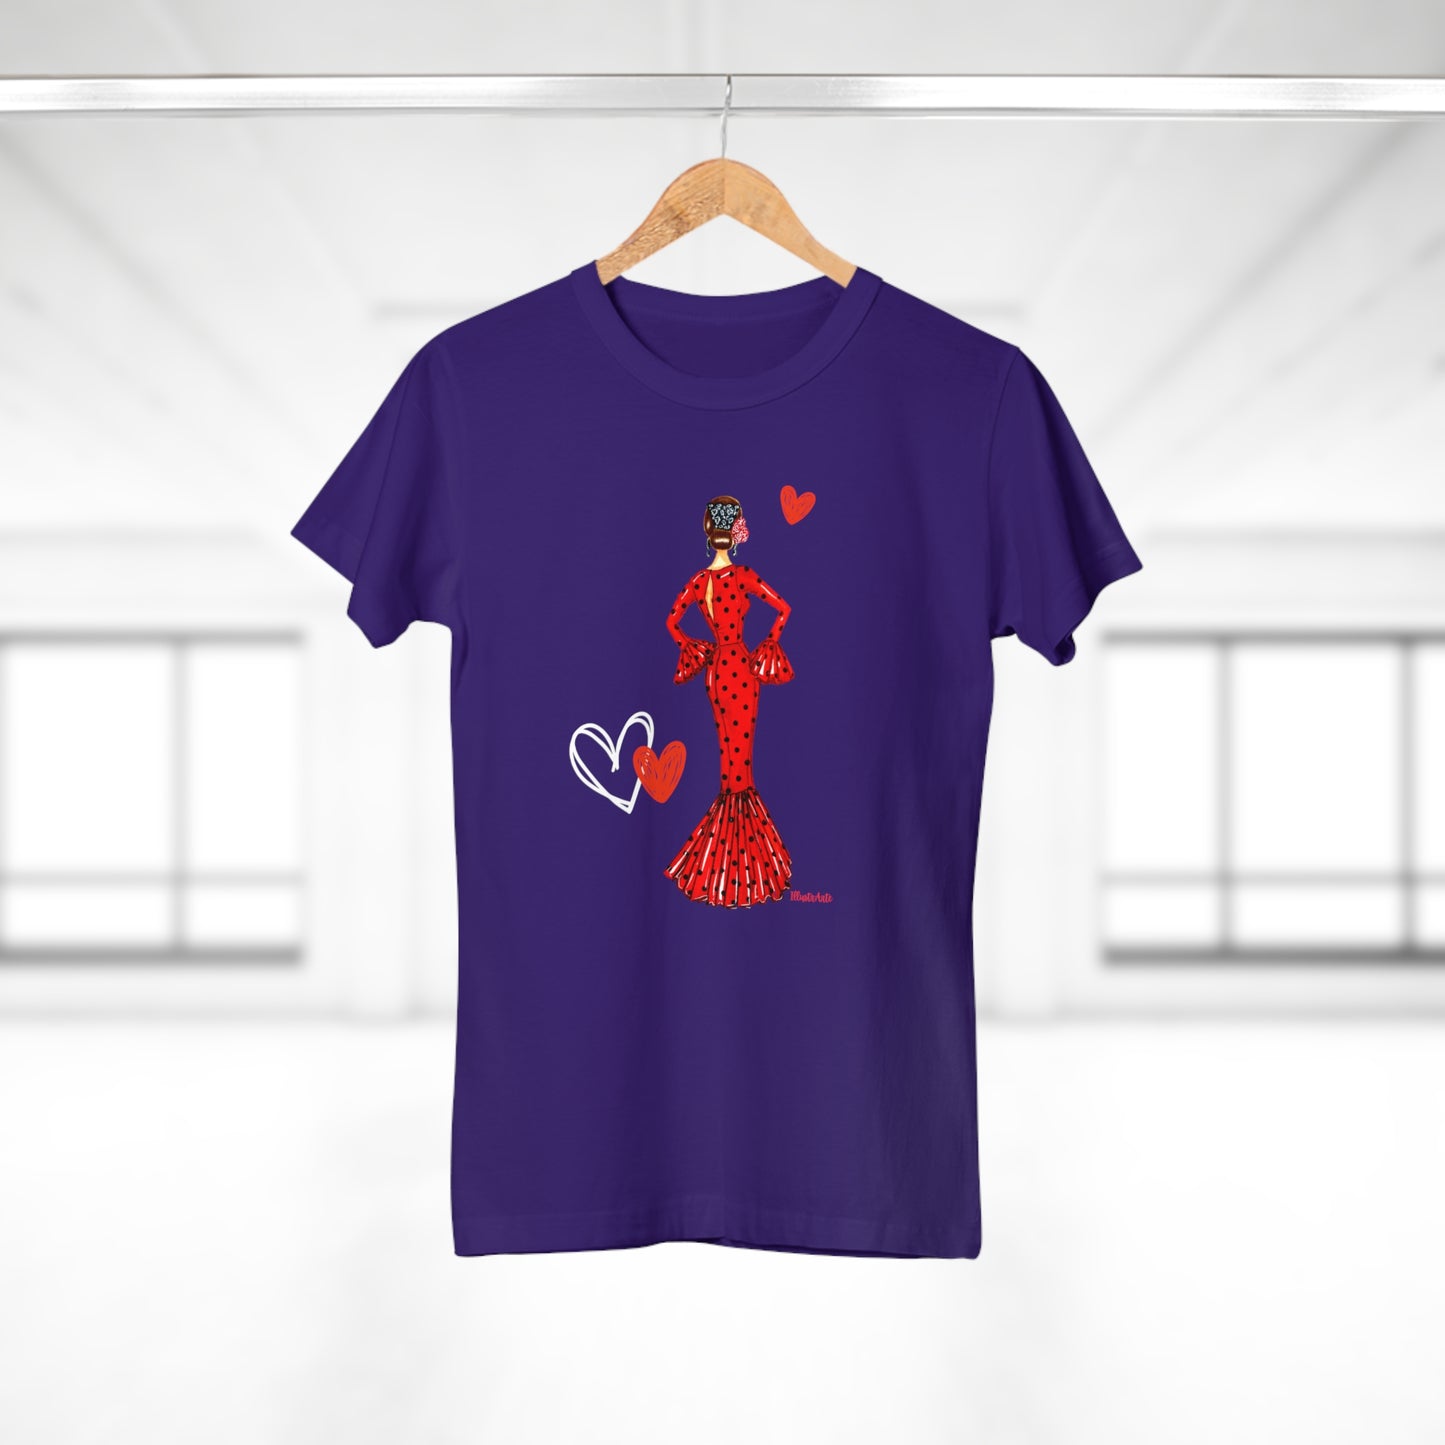 a purple t - shirt with a woman in a red dress holding a heart